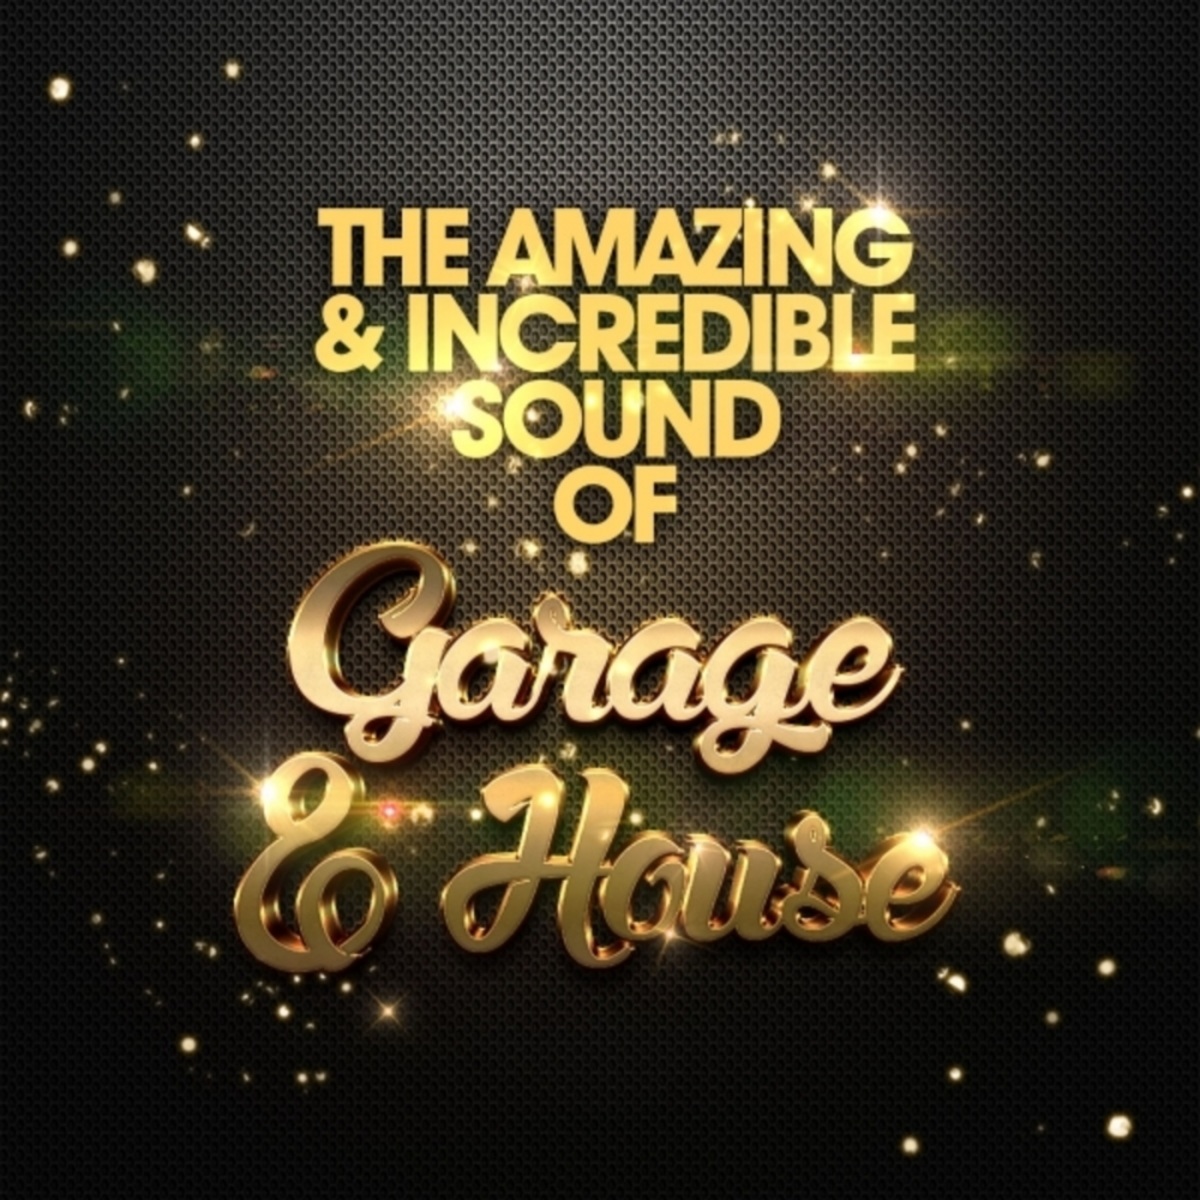 VA - The Amazing & Incredible Sound of Garage, & House / M.I.RAW Recordings